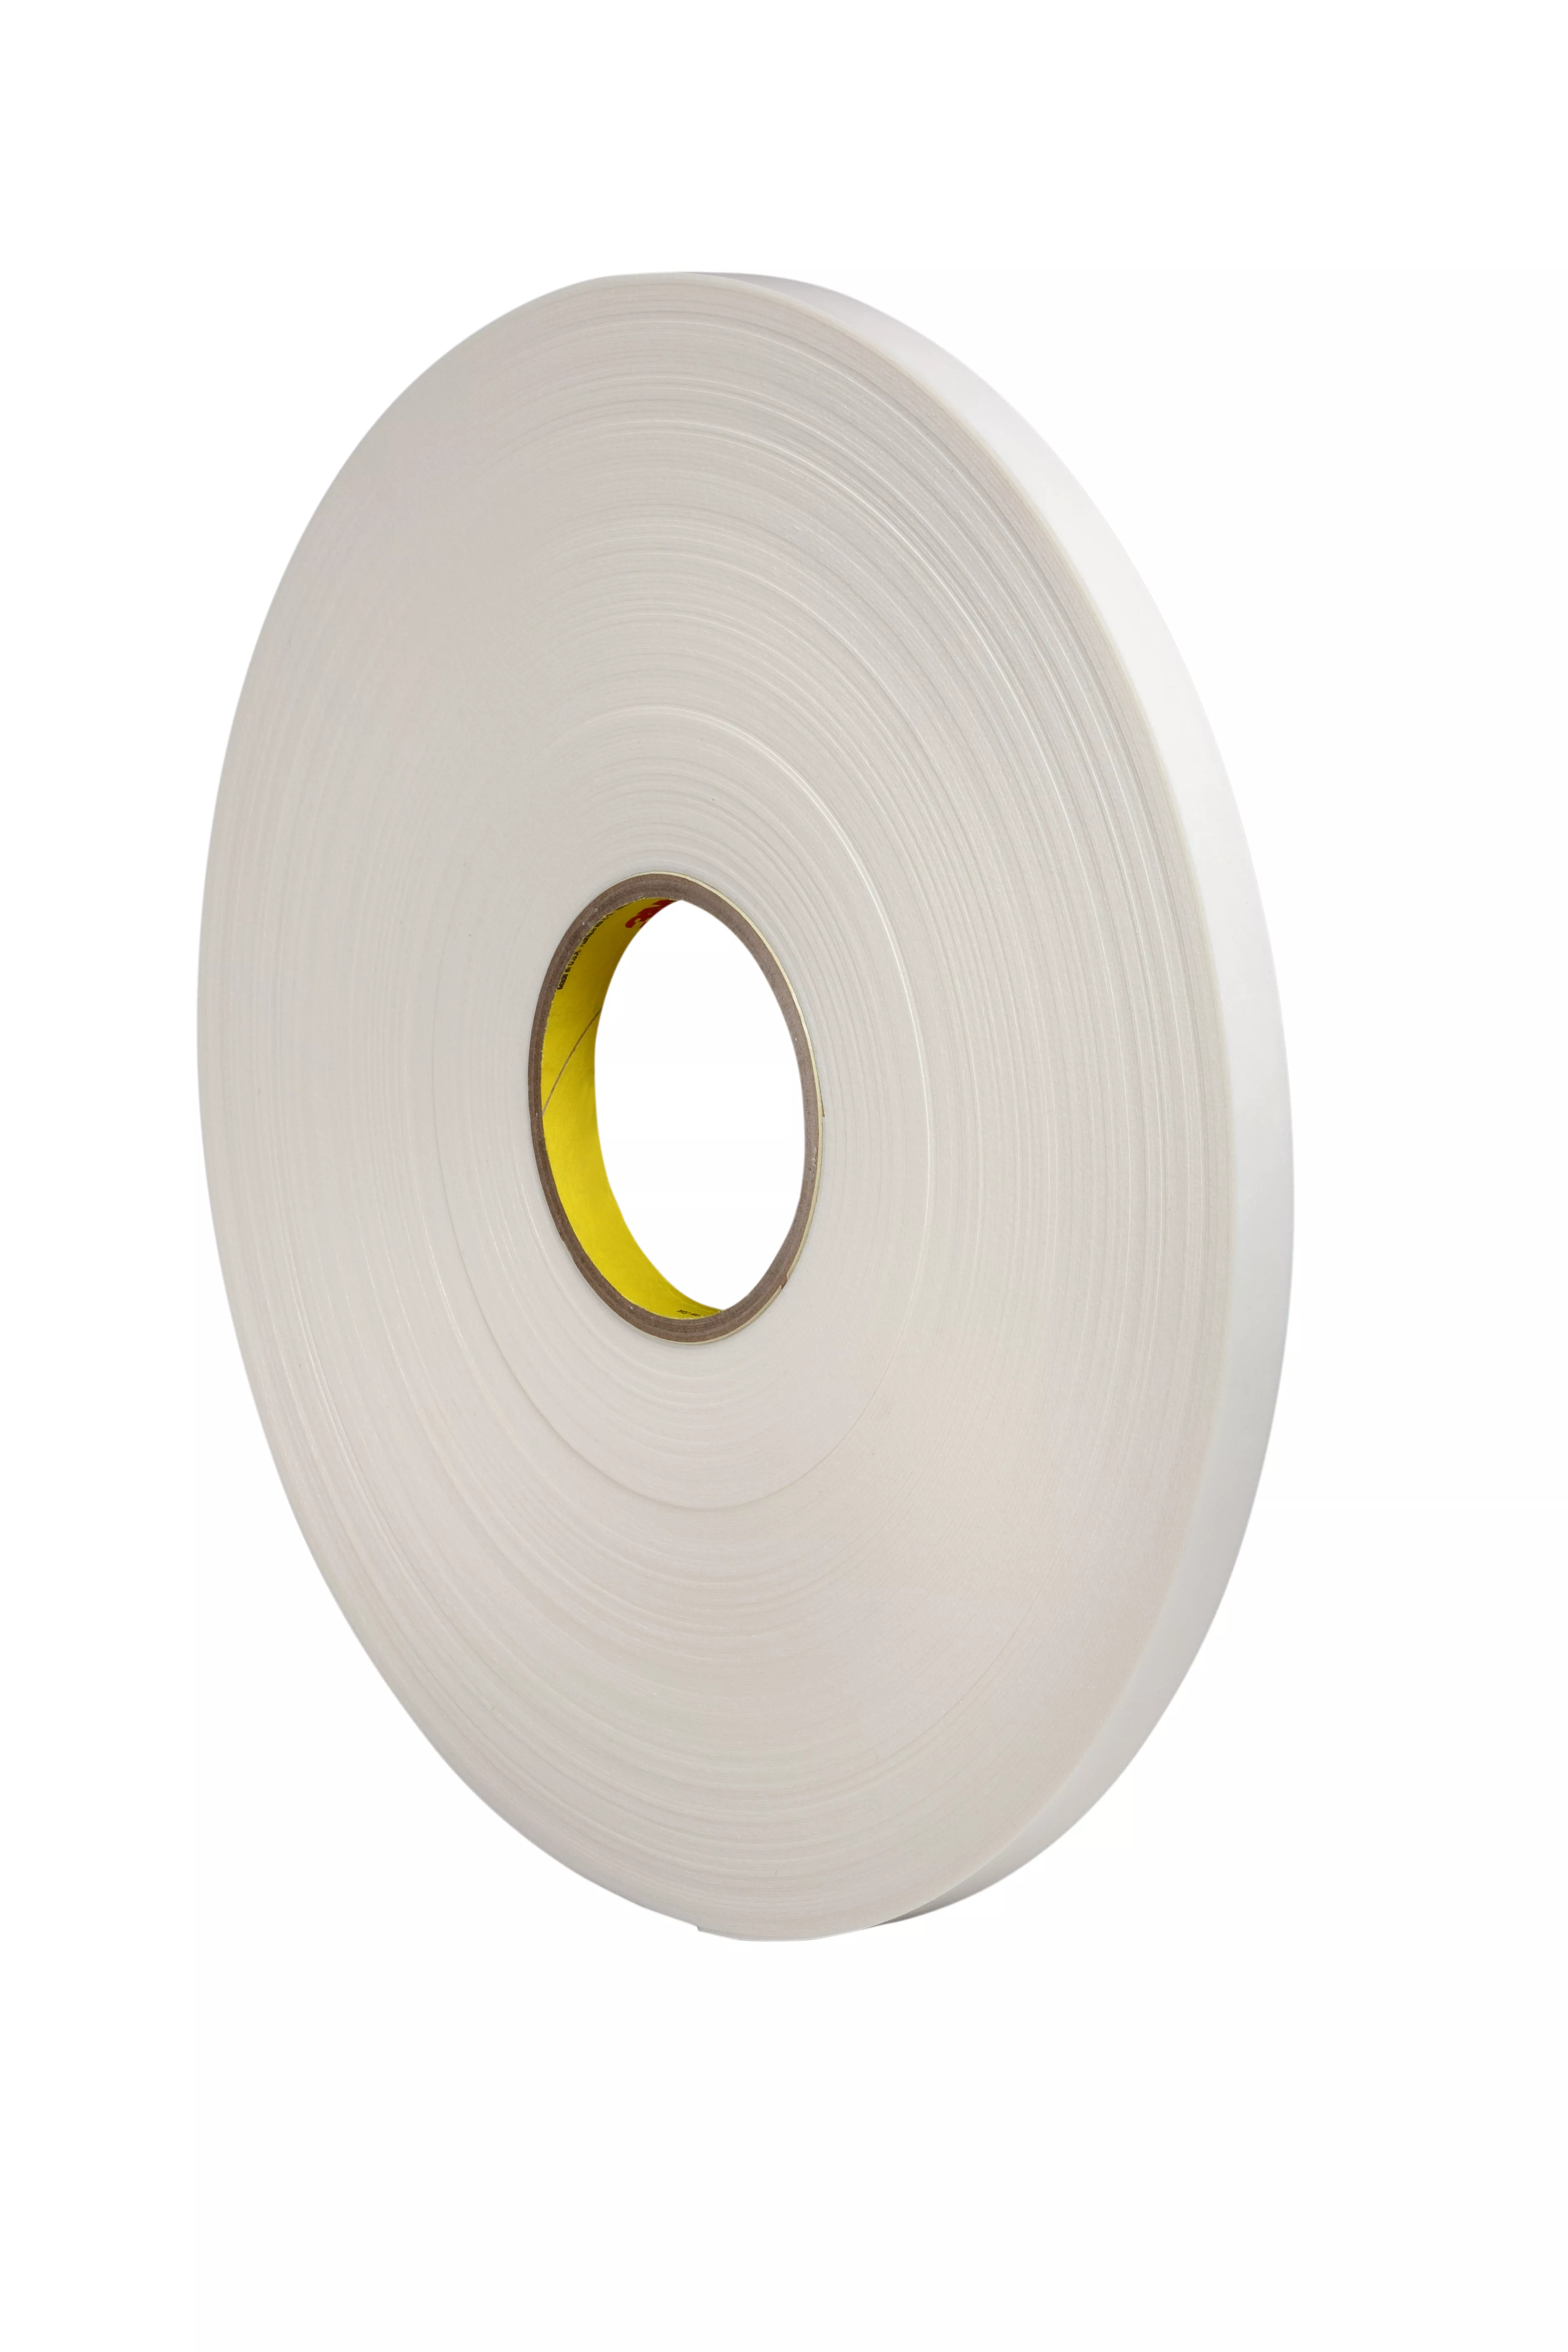 3M™ Urethane Foam Tape 4108, Natural, 3/4 in x 36 yd, 125 mil, 12
Roll/Case